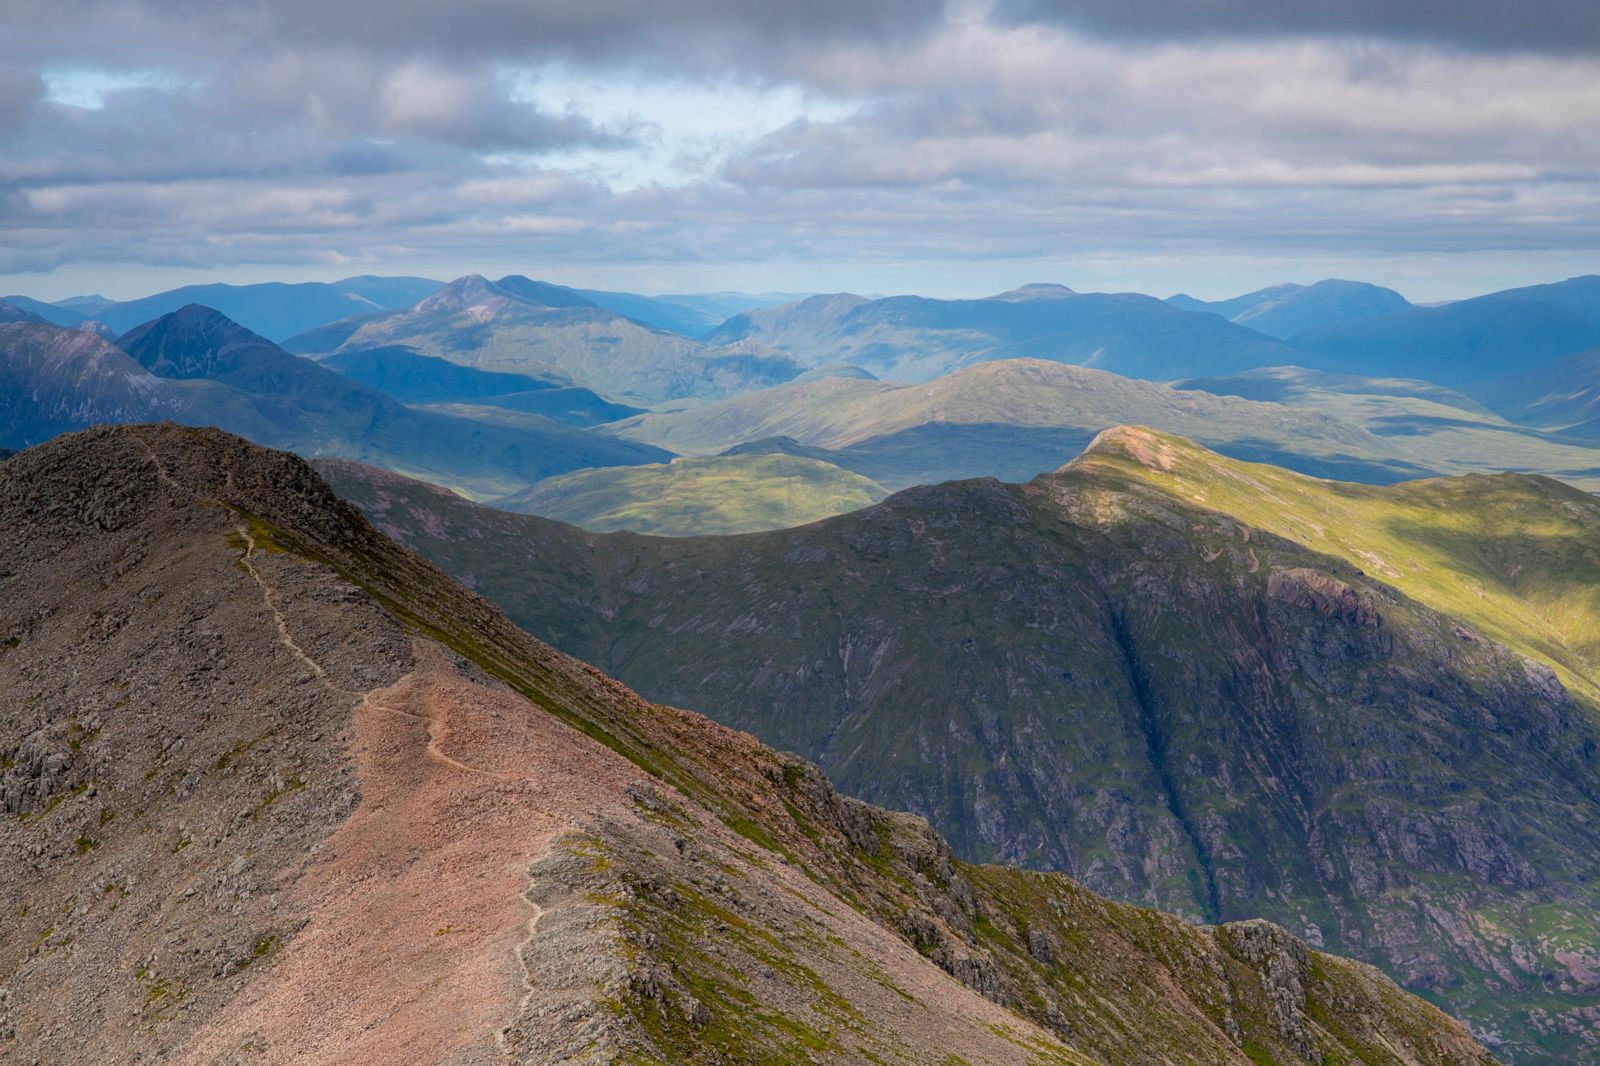 View of the South face of Stob Coire bab Lochan (1115m) from Bidean nam Bian (1141m).